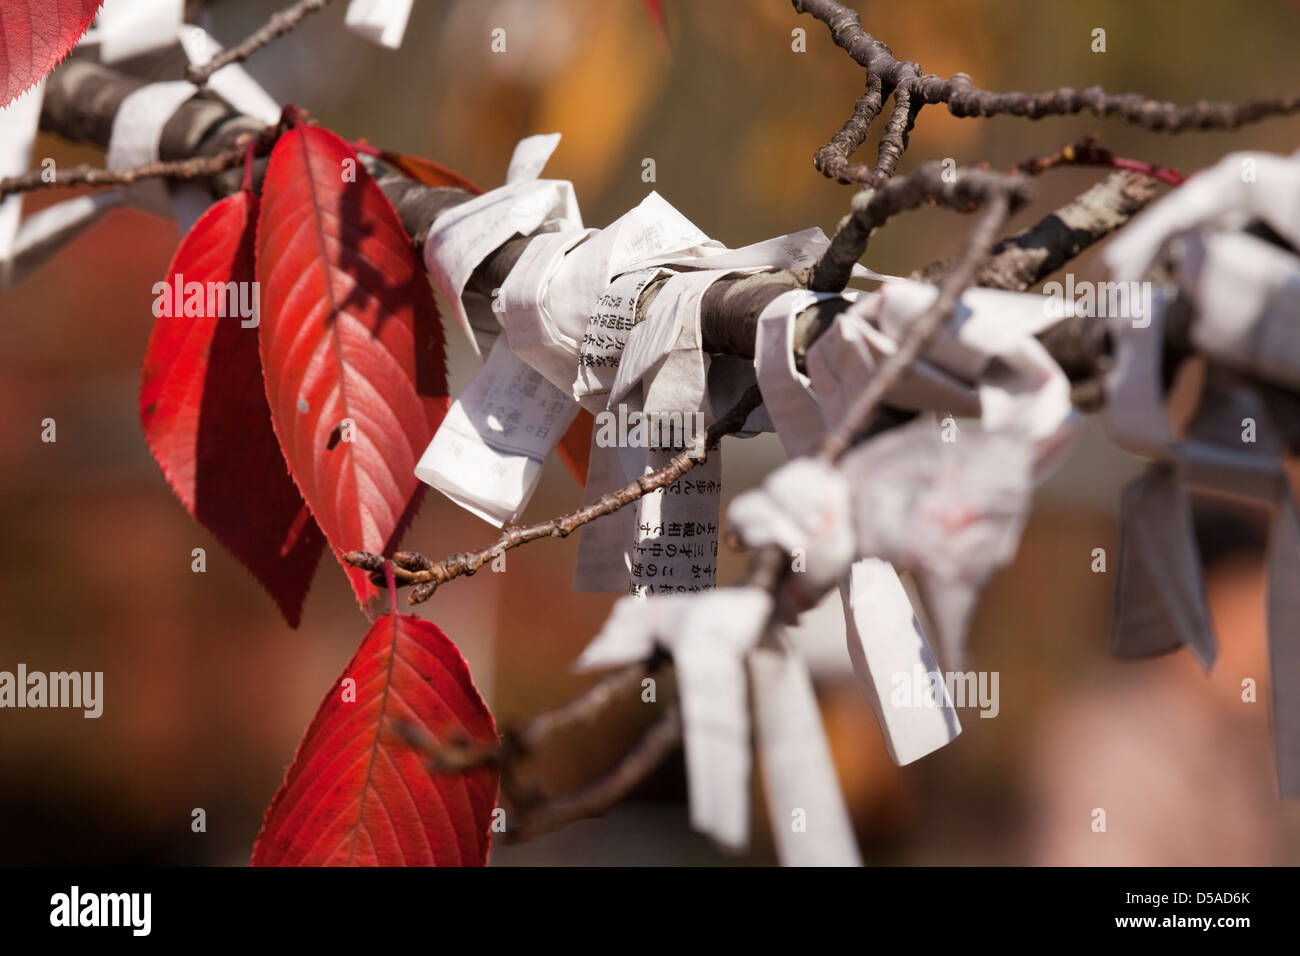 omikuji, paper prayers or wishes wrapped around a red cherry tree in a shrine in Kyoto, Japan, Stock Photo